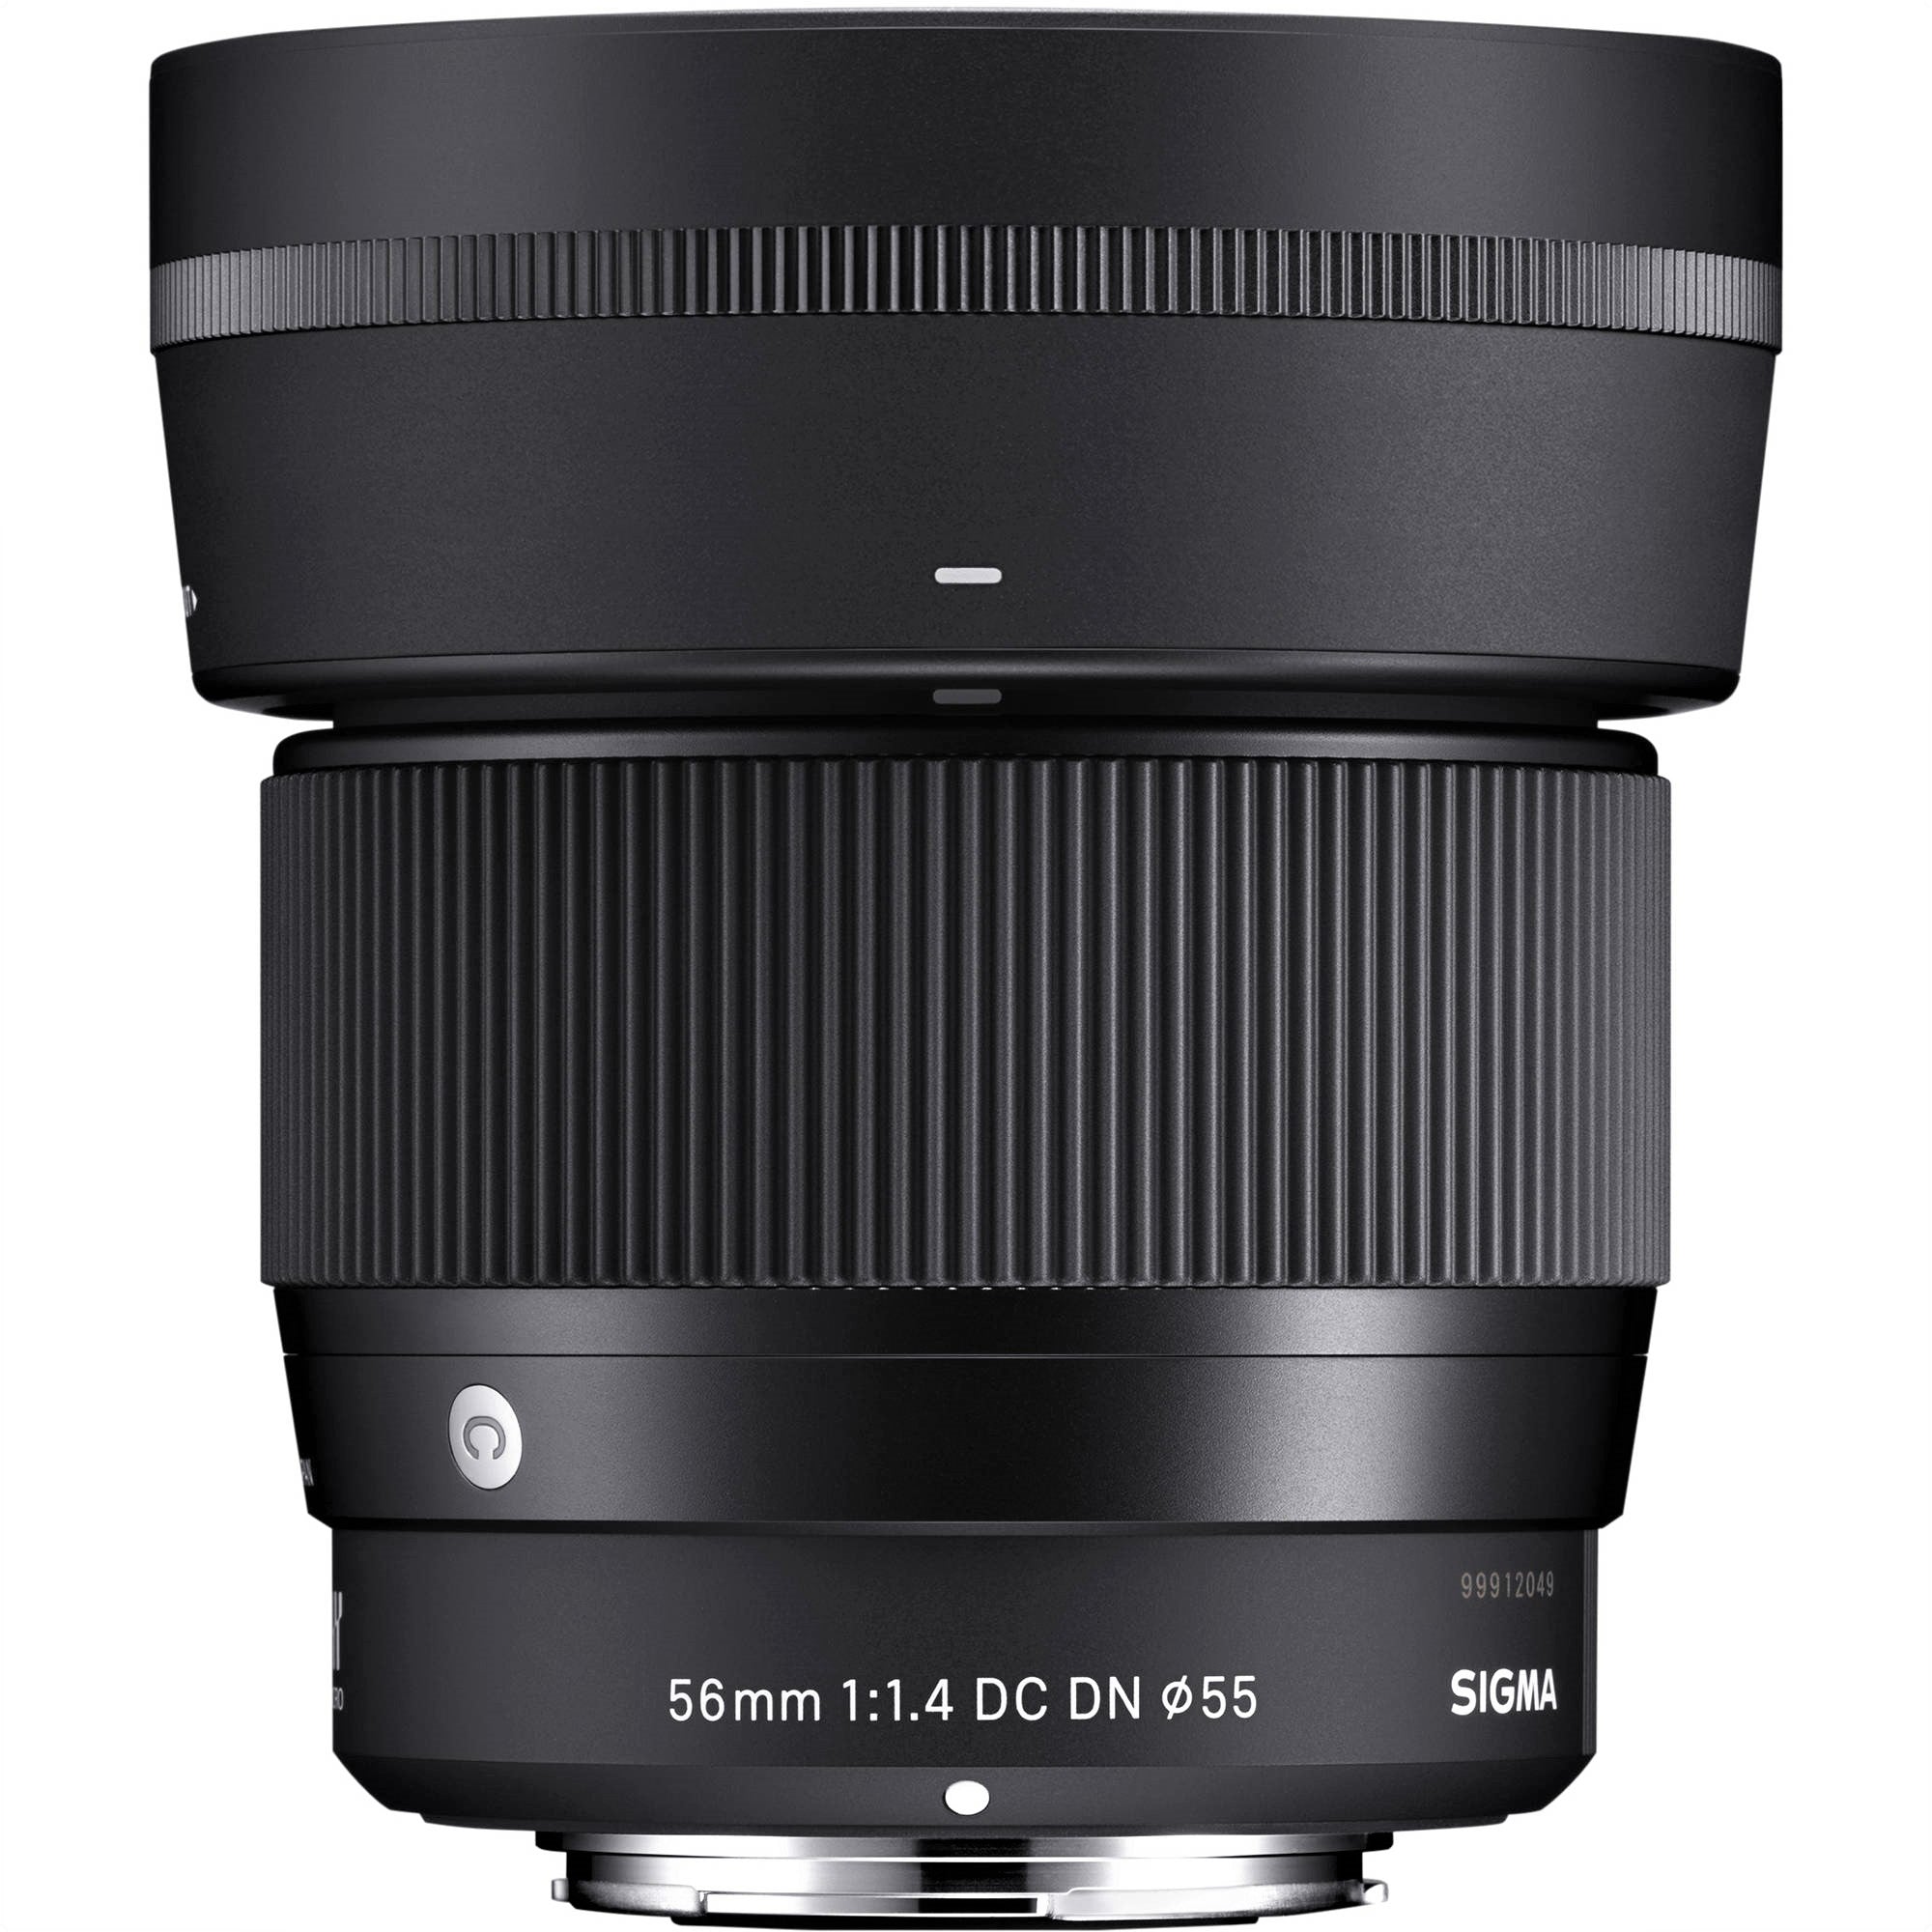 Sigma Lens Hood Attached to 56mm F1.4 DC DN Contemporary Lens